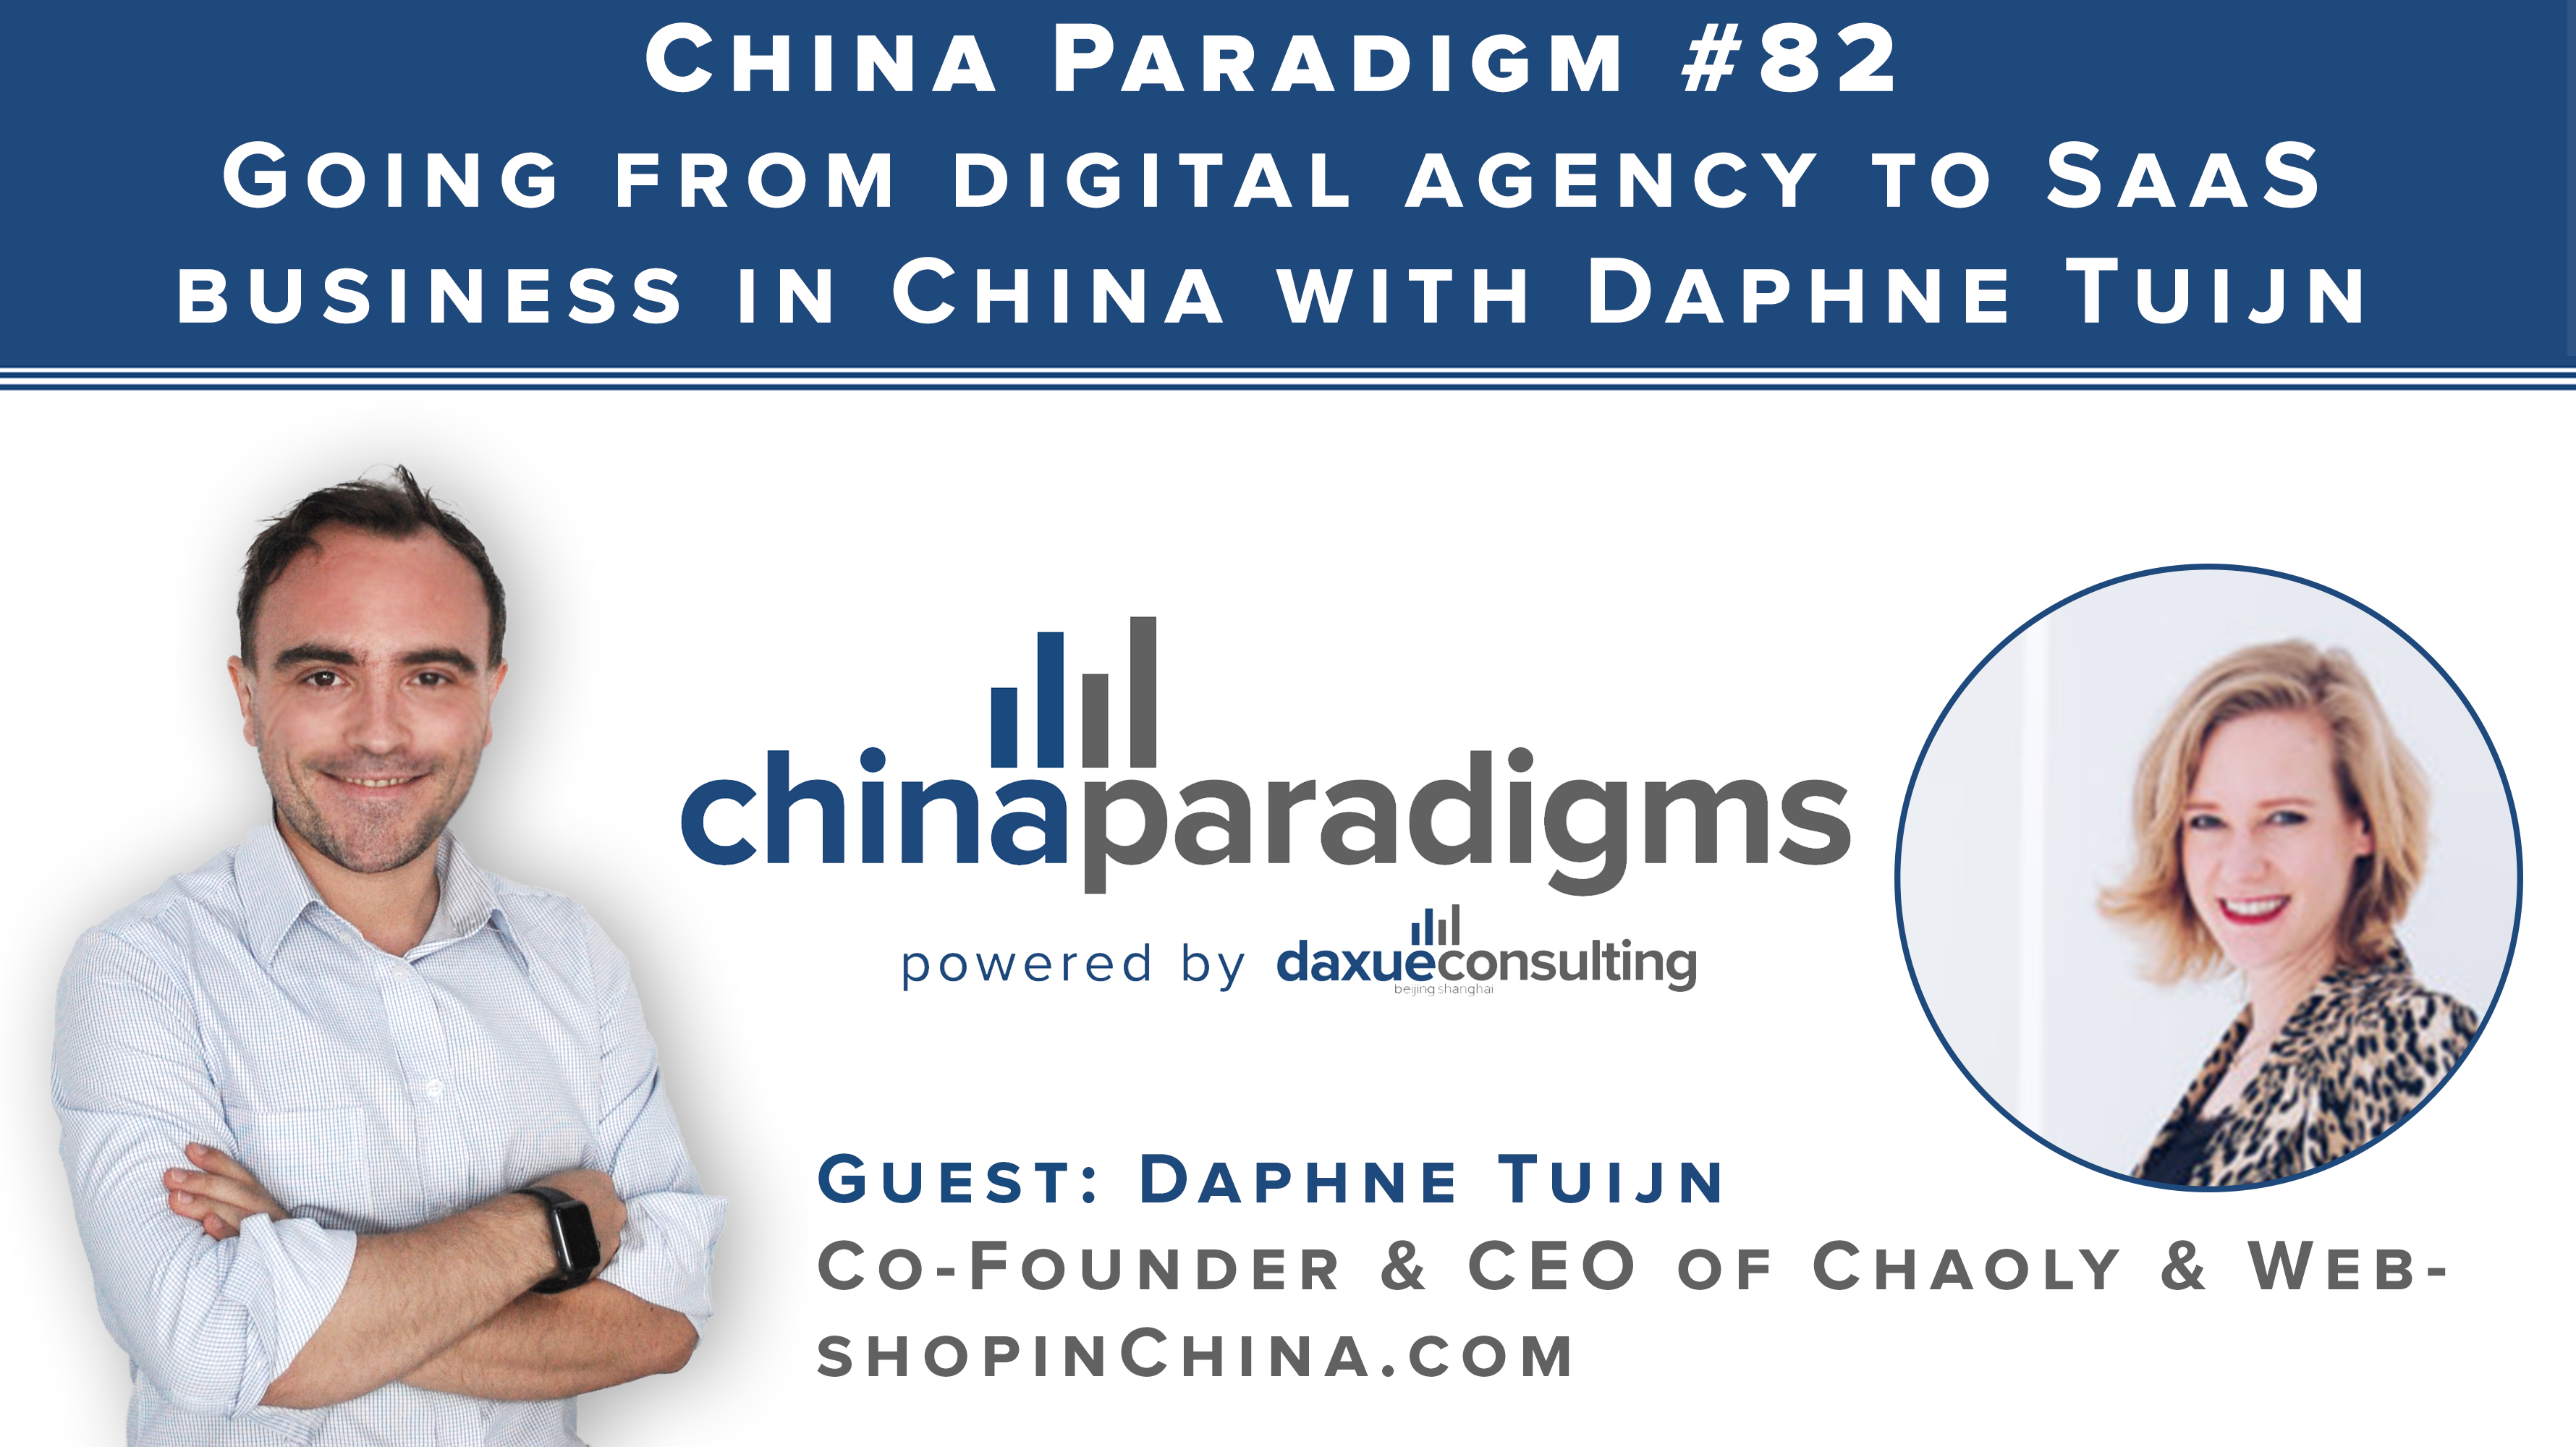 China Paradigm 82: Going from digital agency to SaaS business in China with Daphne Tuijn